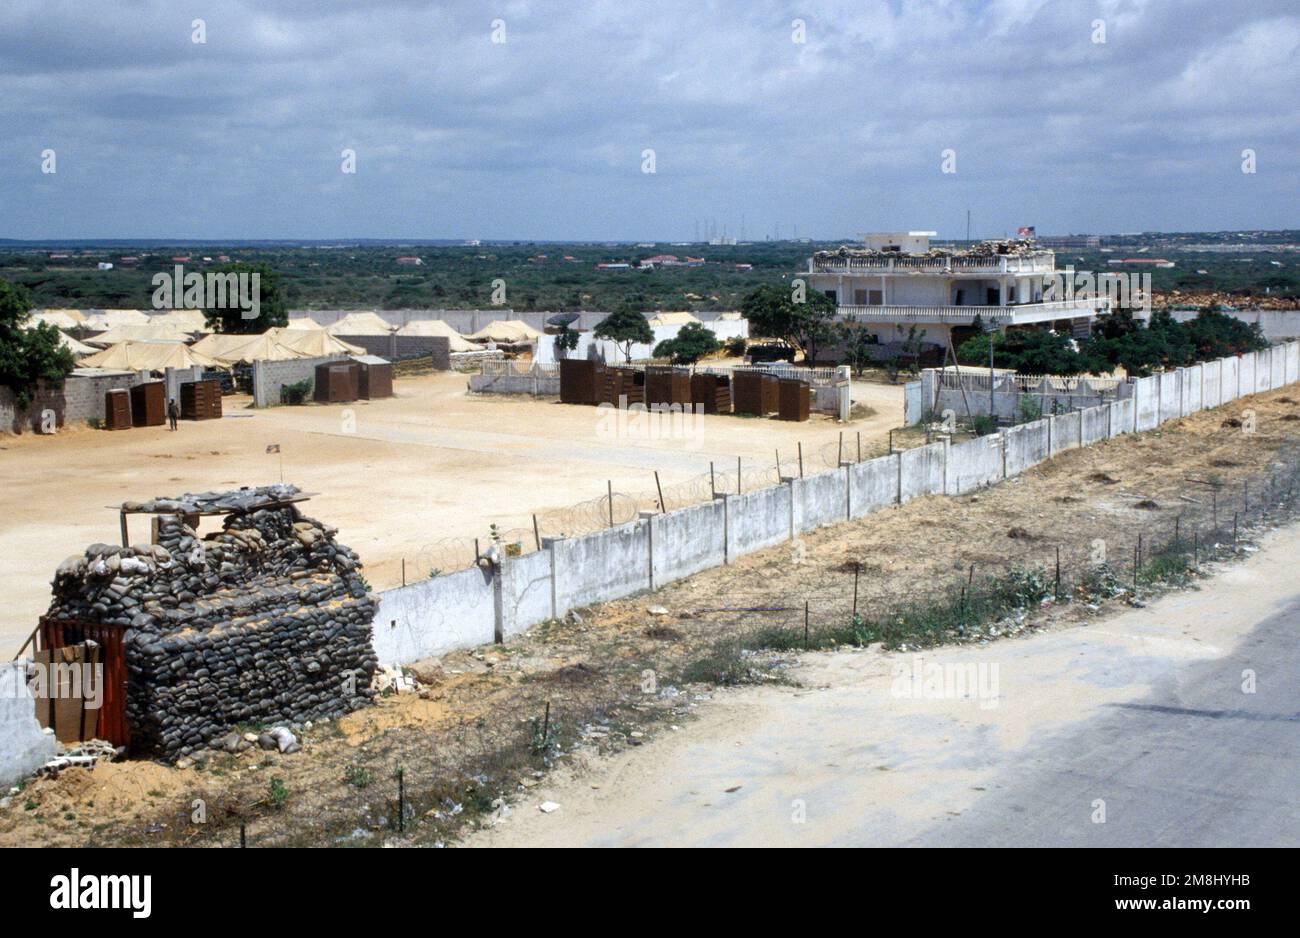 DA-ST-96-00341... MOGADISHU, SOMALIA... 30 Oct 1993... Operation Continue Hope. A view of Hunter Base, home for the 561st Signal Battalion, 40th Transportation Company and 196th Quartermaster Company. Sandbags have been placed on top of a CONEX to reinforce a break in the wall. Subject Operation/Series: CONTINUE HOPE Base: Mogadishu Country: Somalia (SOM) Stock Photo